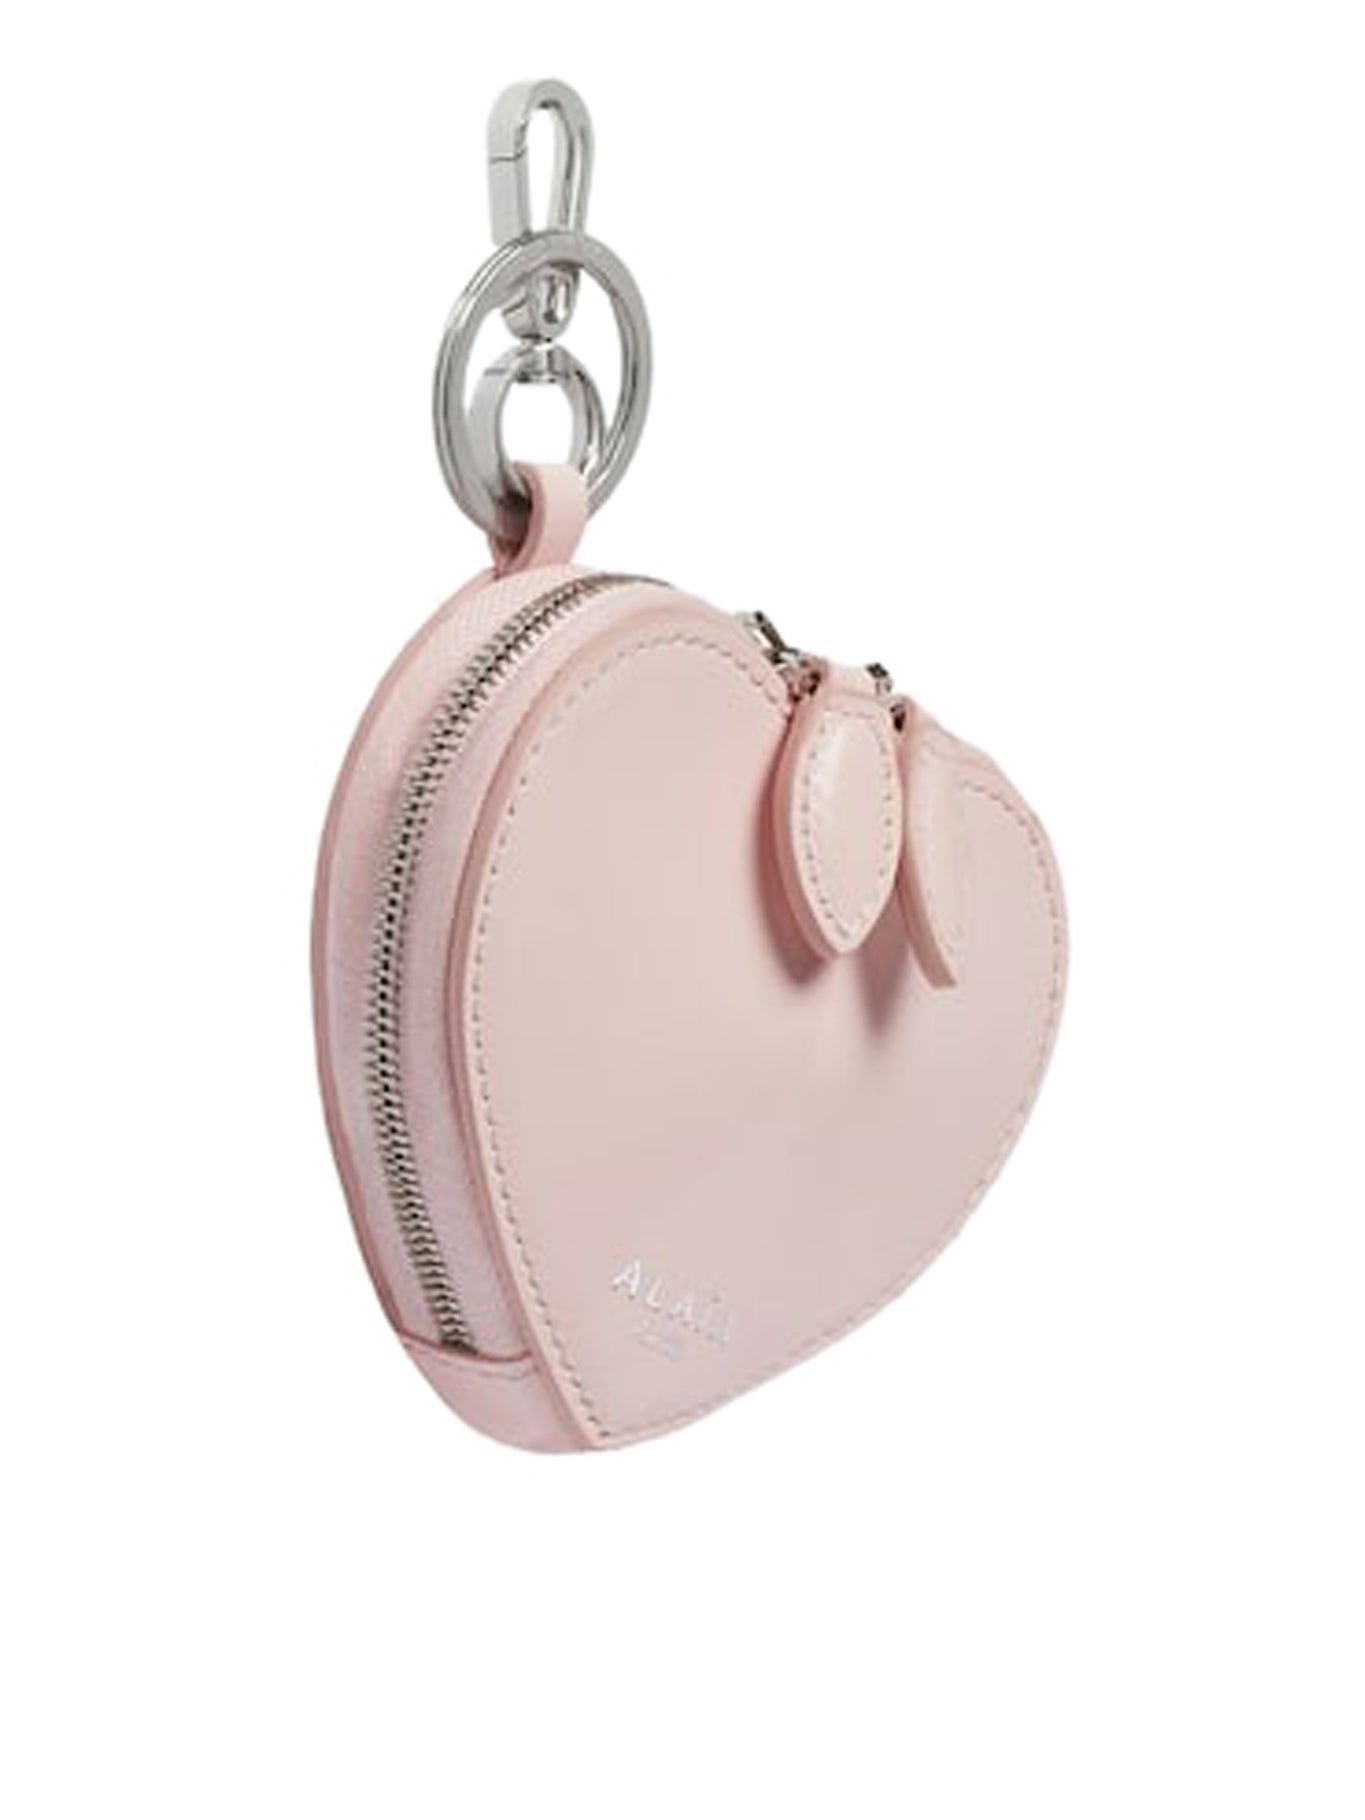 Fashion Women Heart-shaped Wallet Leather Short Coin Purse Tassels  Multi-Slot Card Holder for Ladies' Birthday Gift, Rose Red - Walmart.com